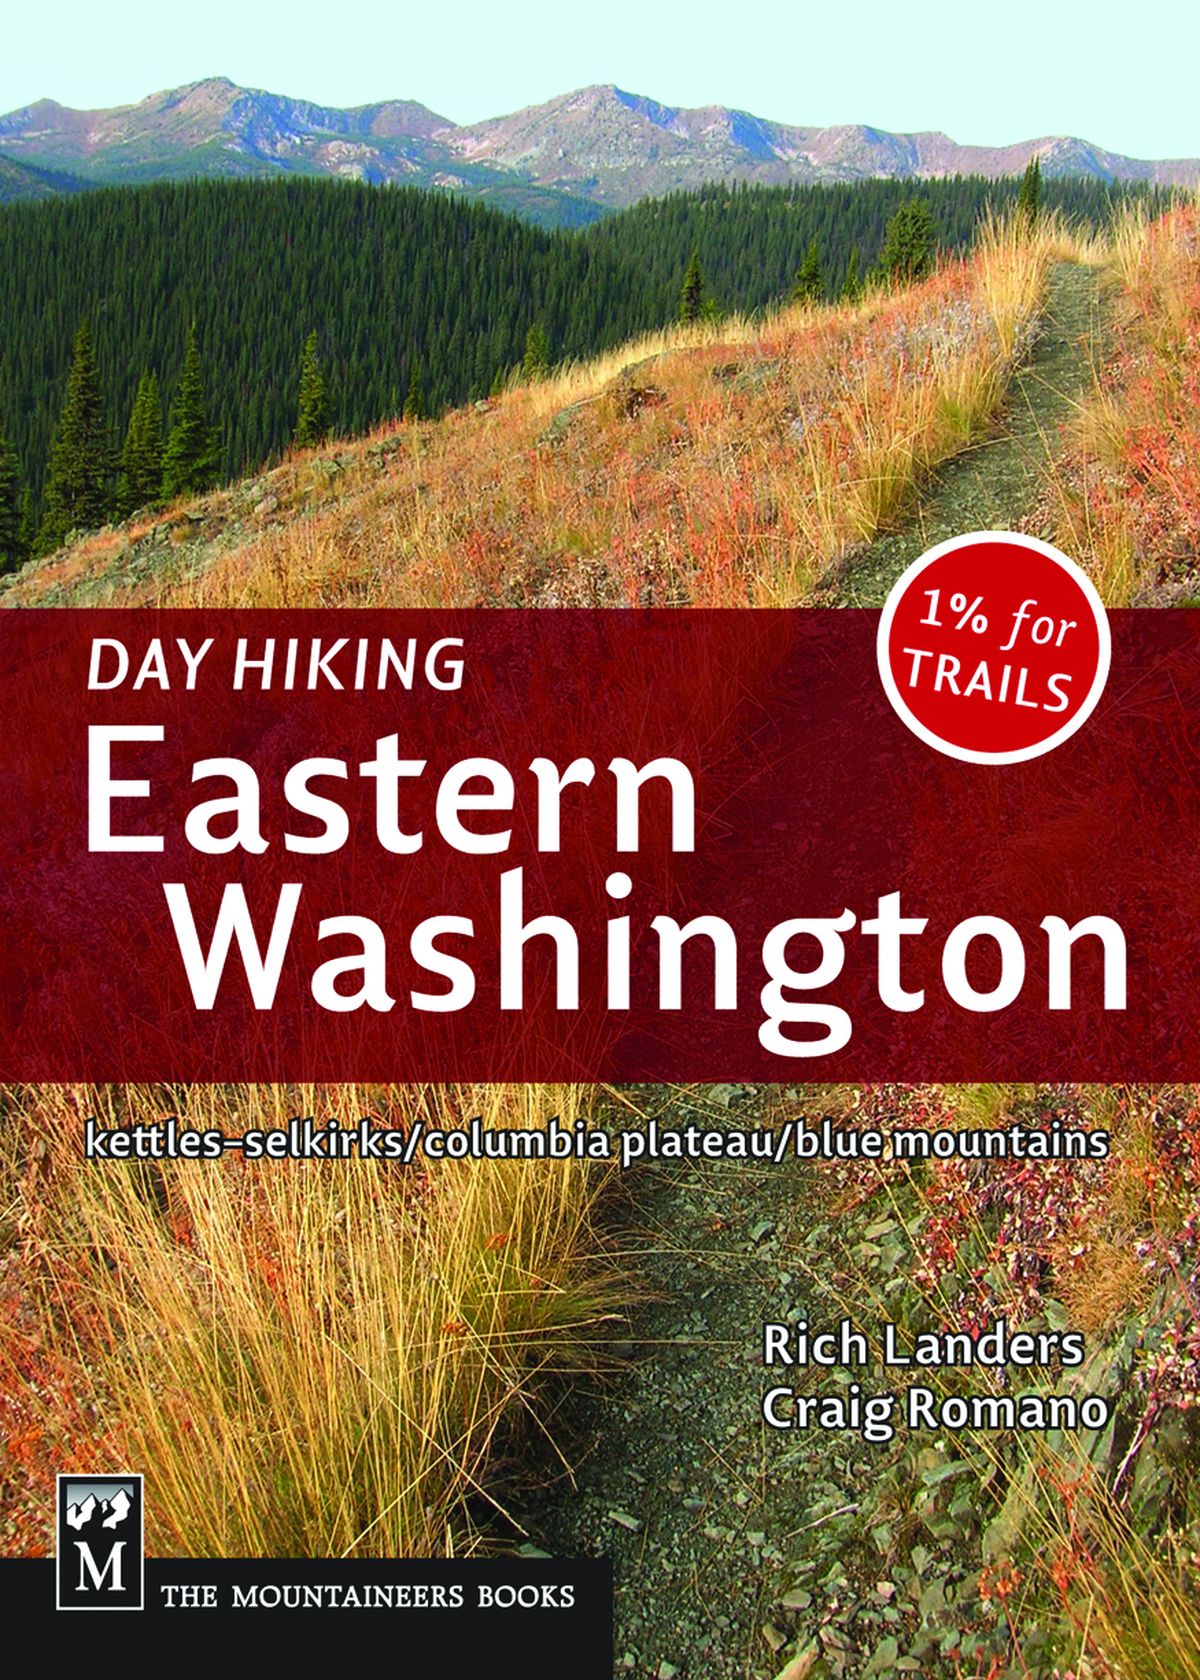 Day Hiking Eastern Washington, published in April 2013 by the Mountaineers-Books, is a guide to 125 hiking trails by Rich Landers and Craig Romano.
